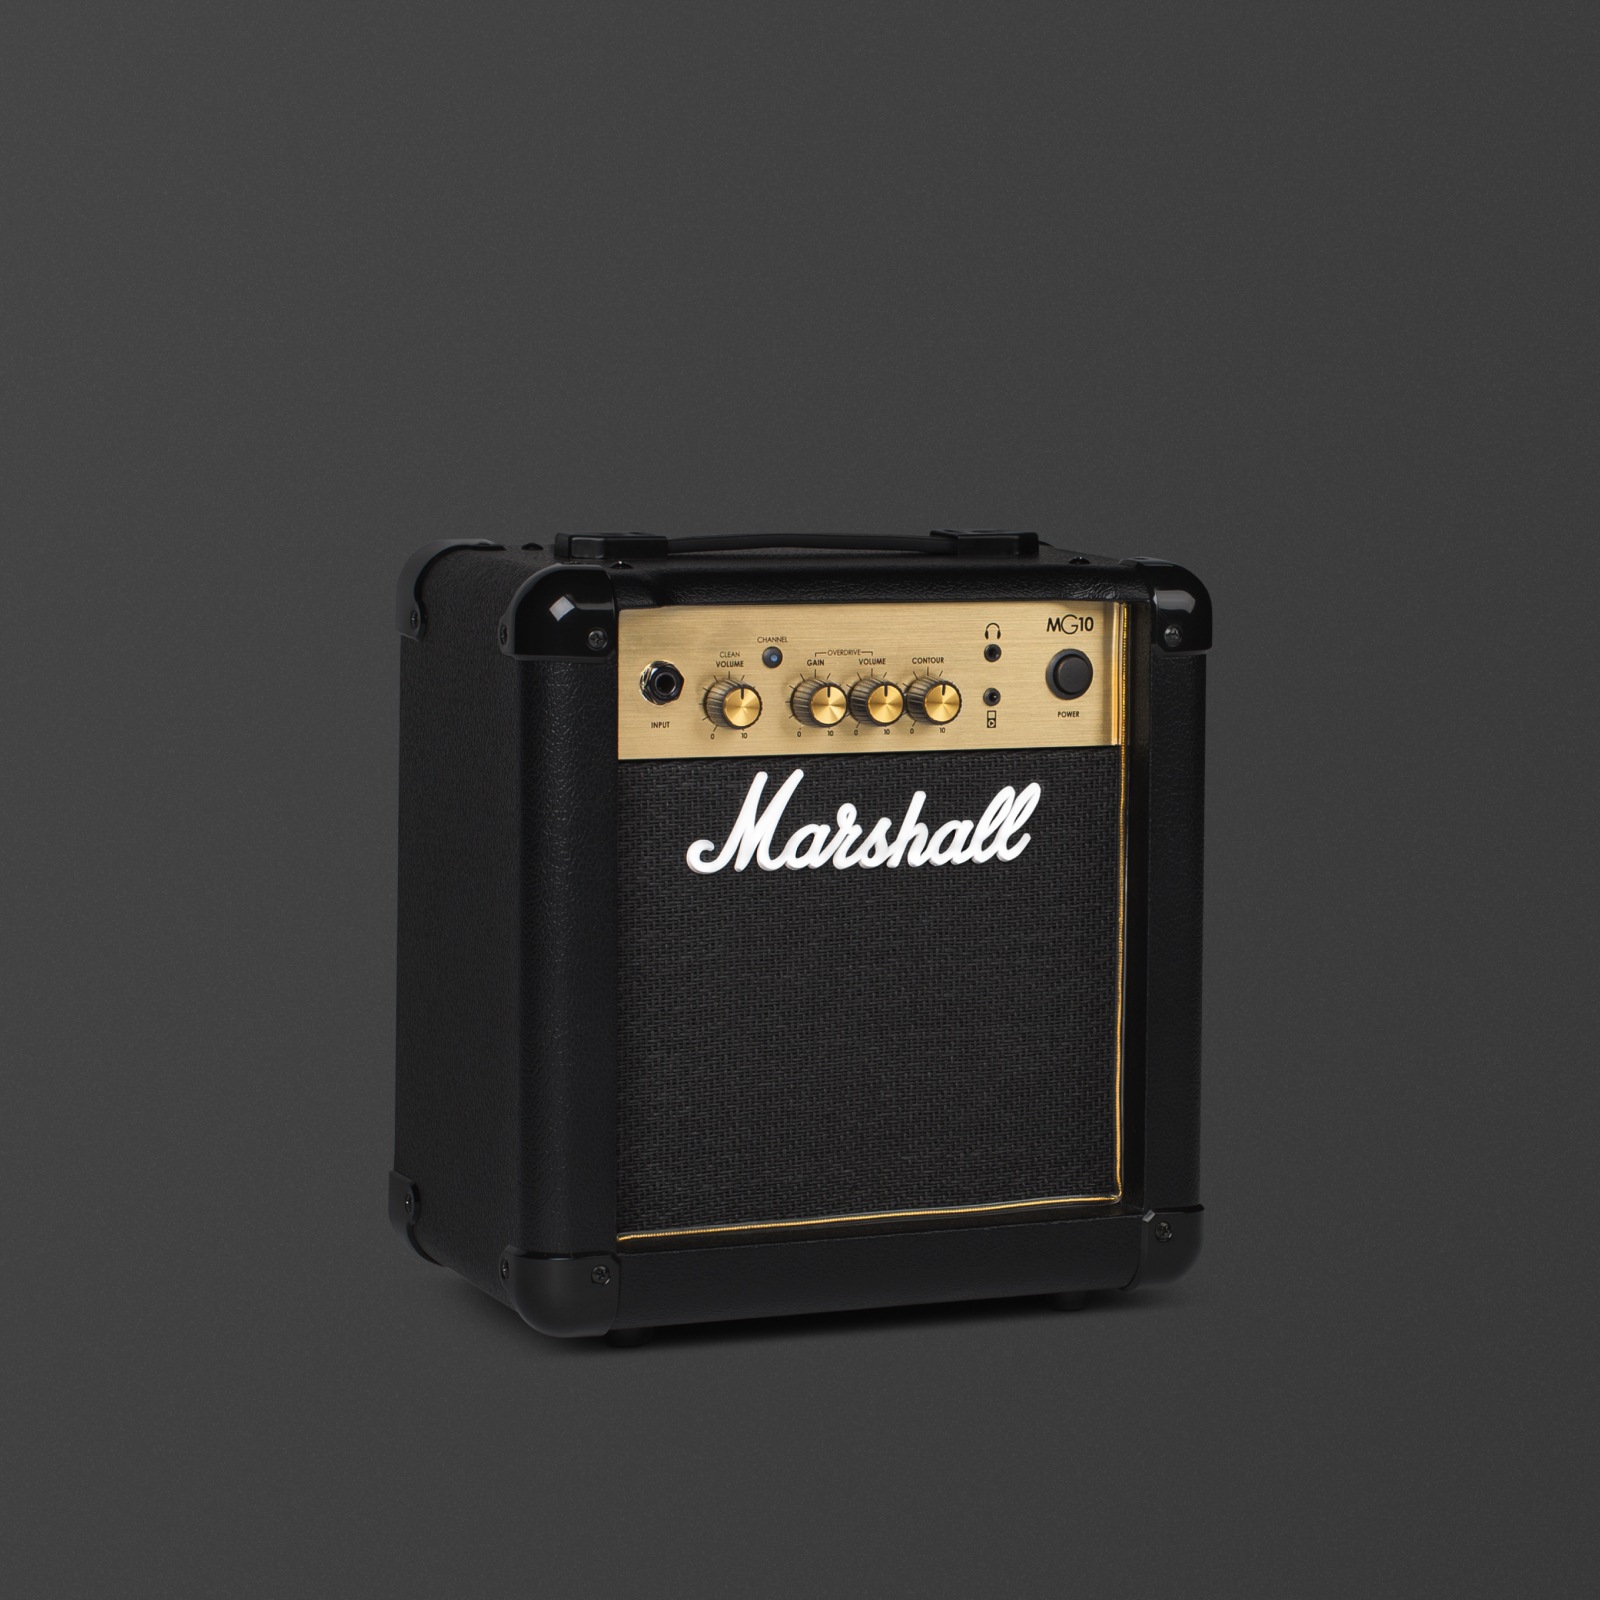 Marshall's MG10 black amplifier with gold knobs.  